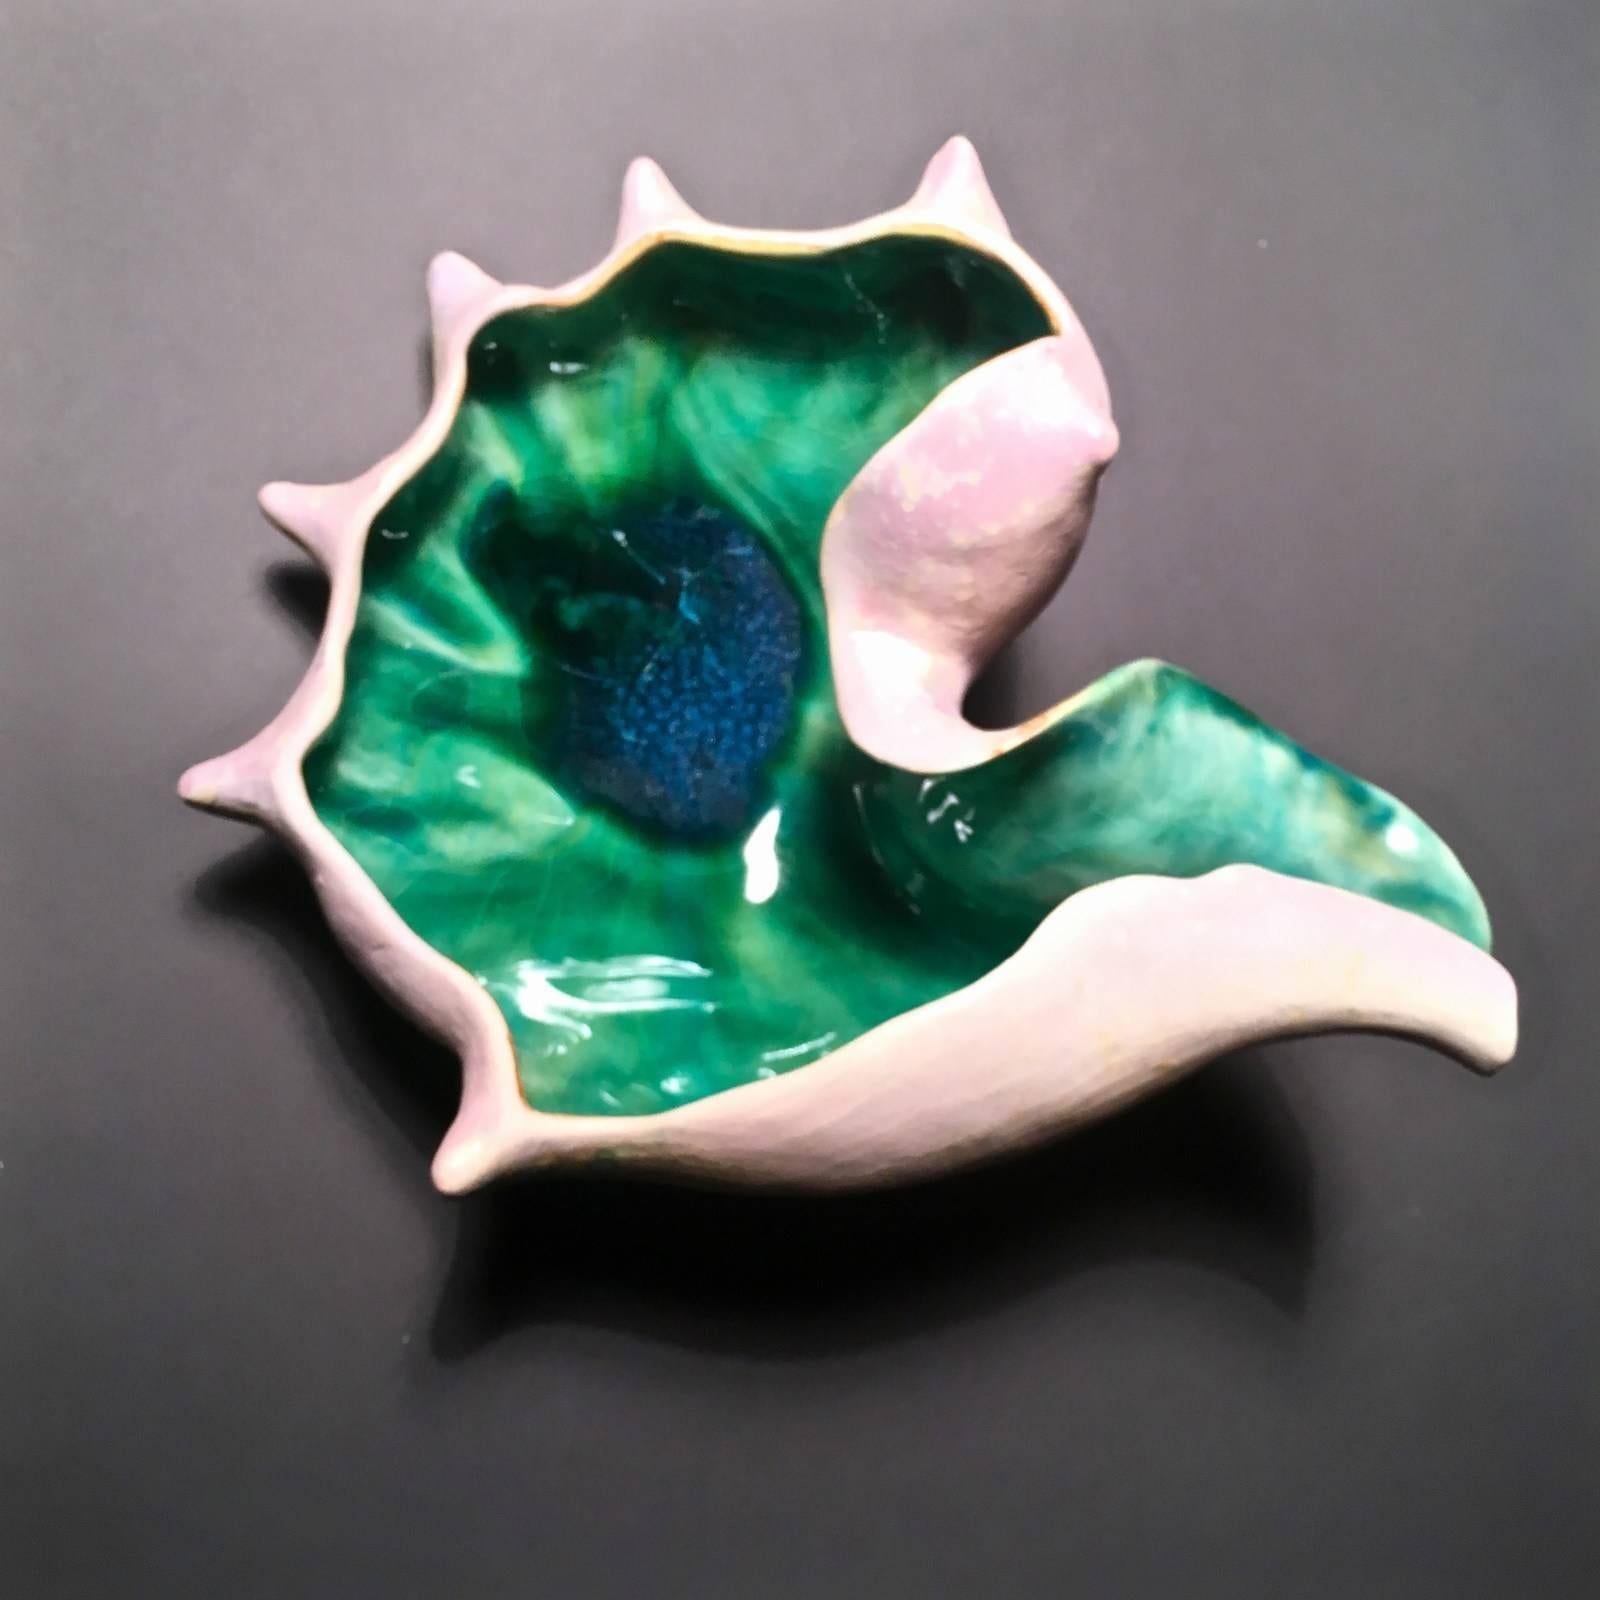 Meditation bowl inspired by a conch shell